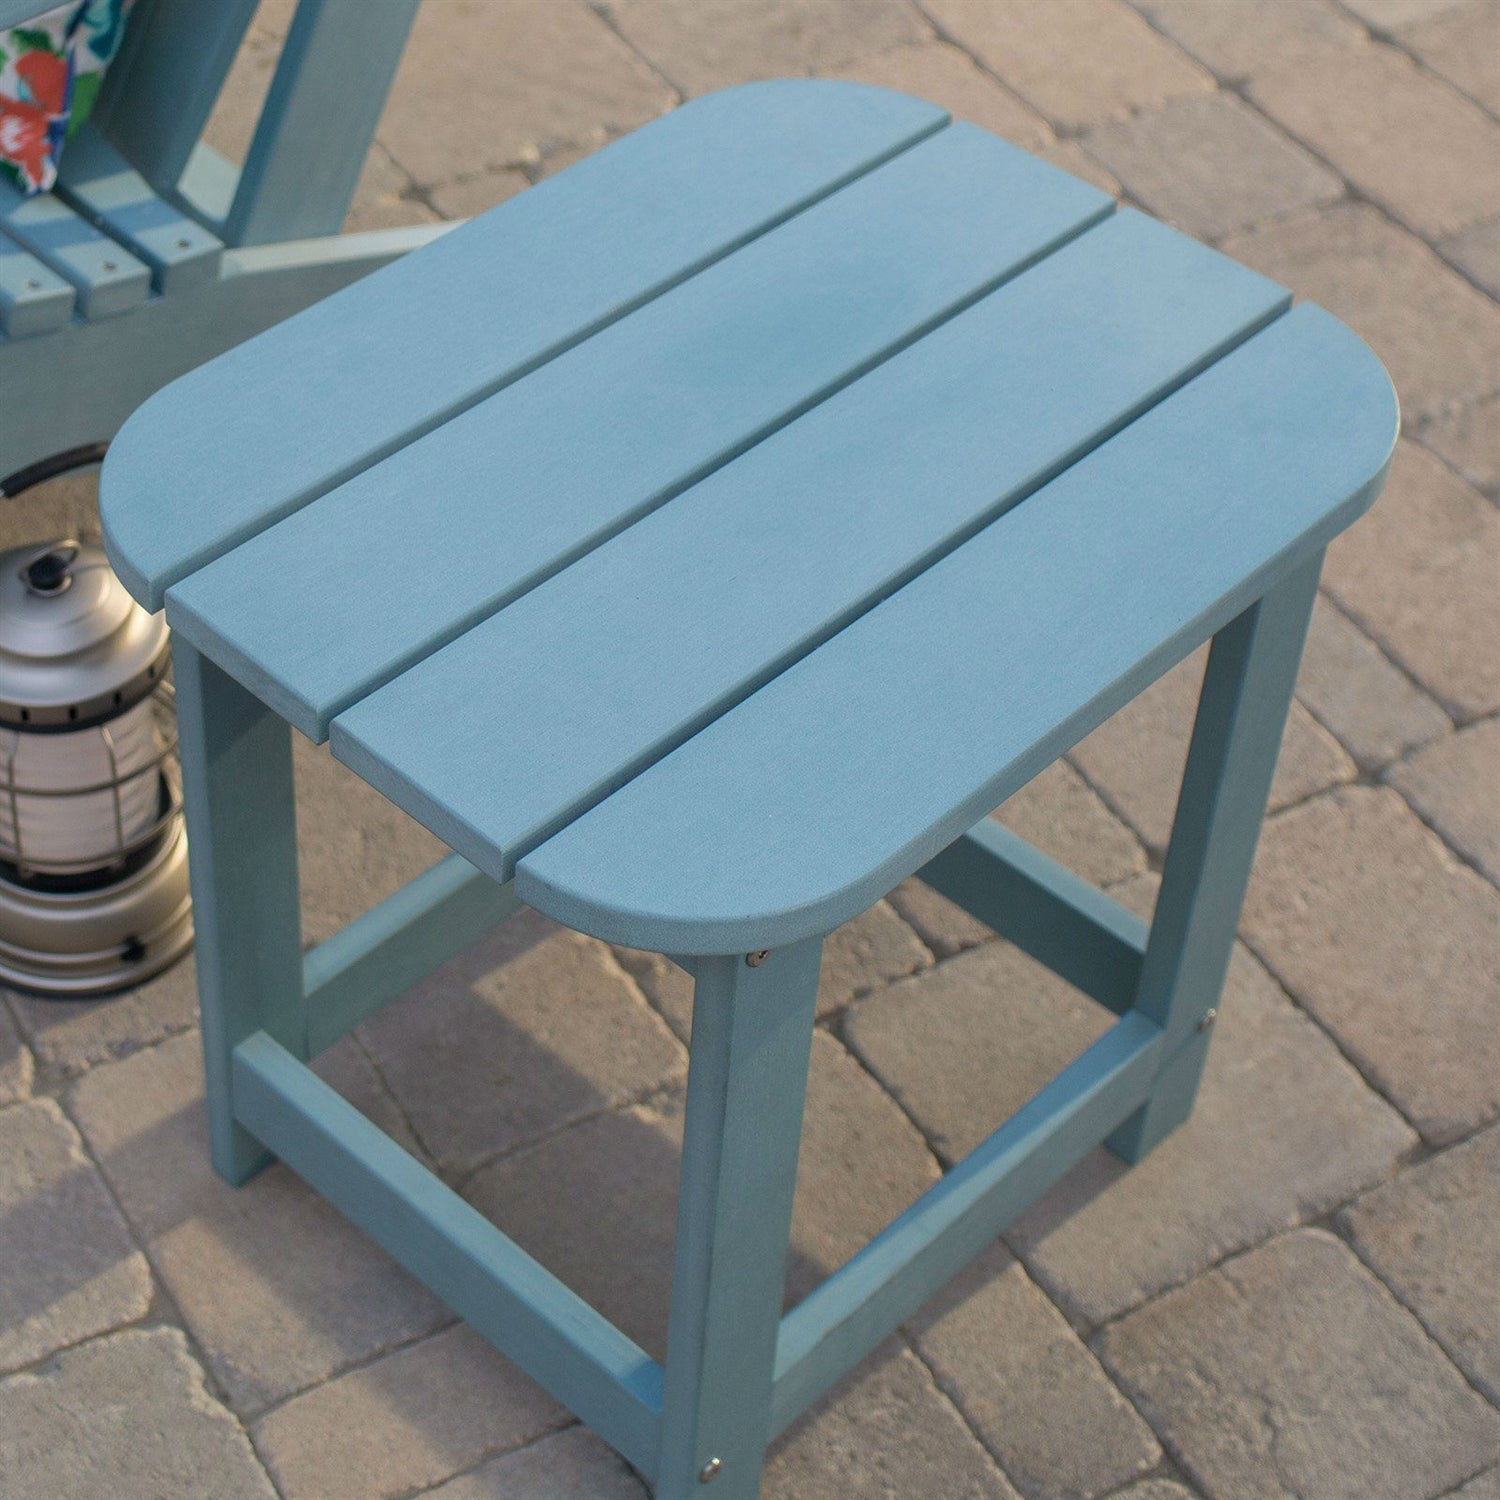 Outdoor > Outdoor Furniture > Patio Tables - Outdoor Deck Patio Side Table In Blue Green Resin Wood-look Finish